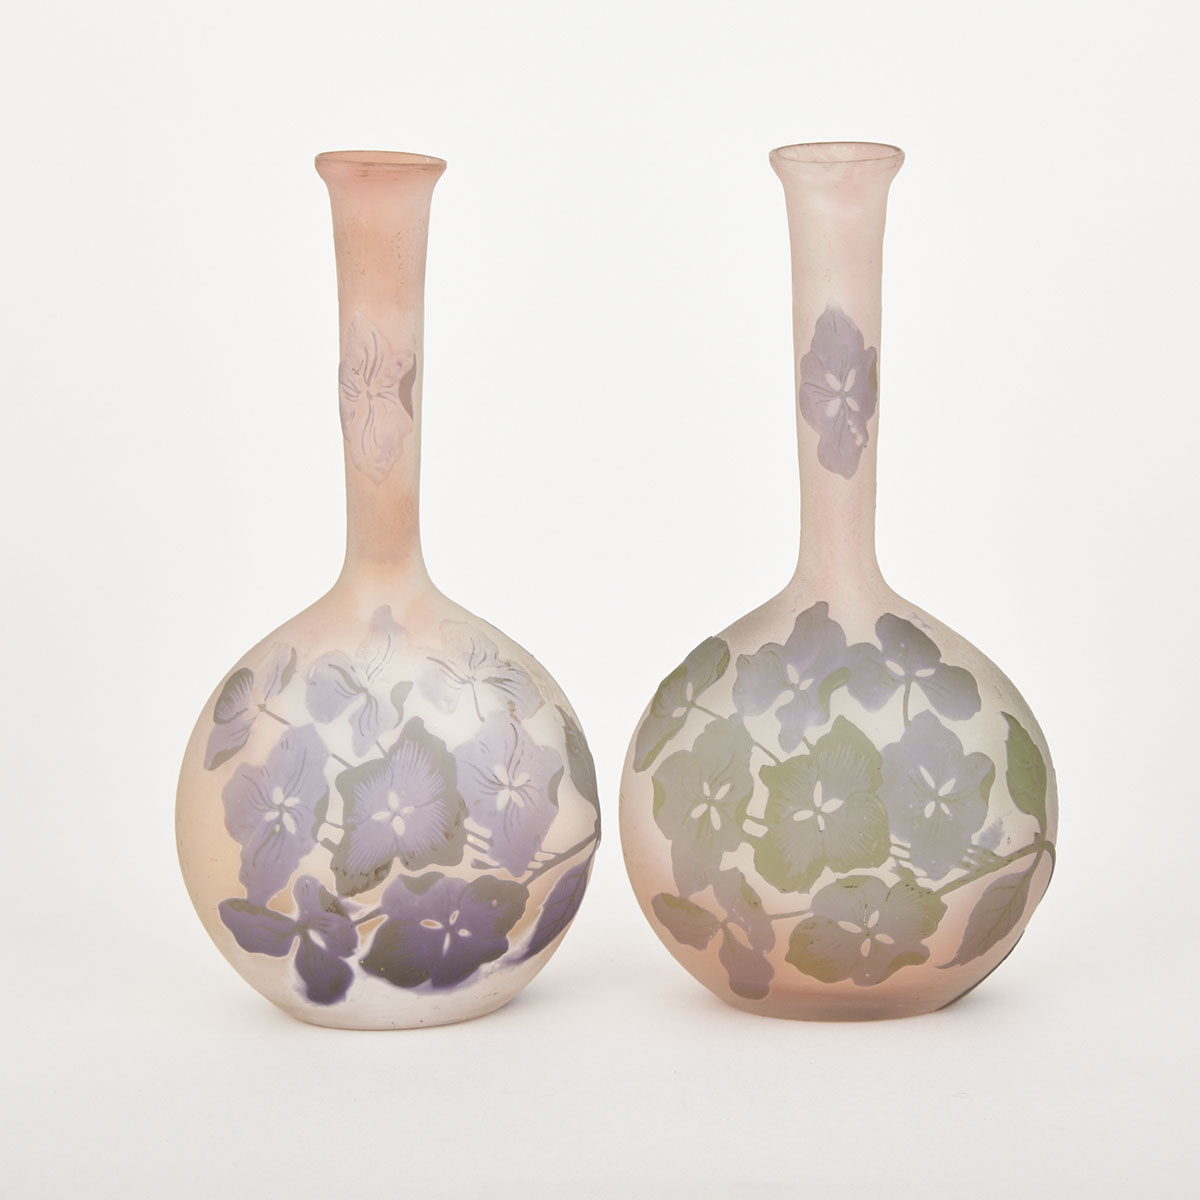 Pair of Gallé Clematis Cameo Glass Vases, early 20th century